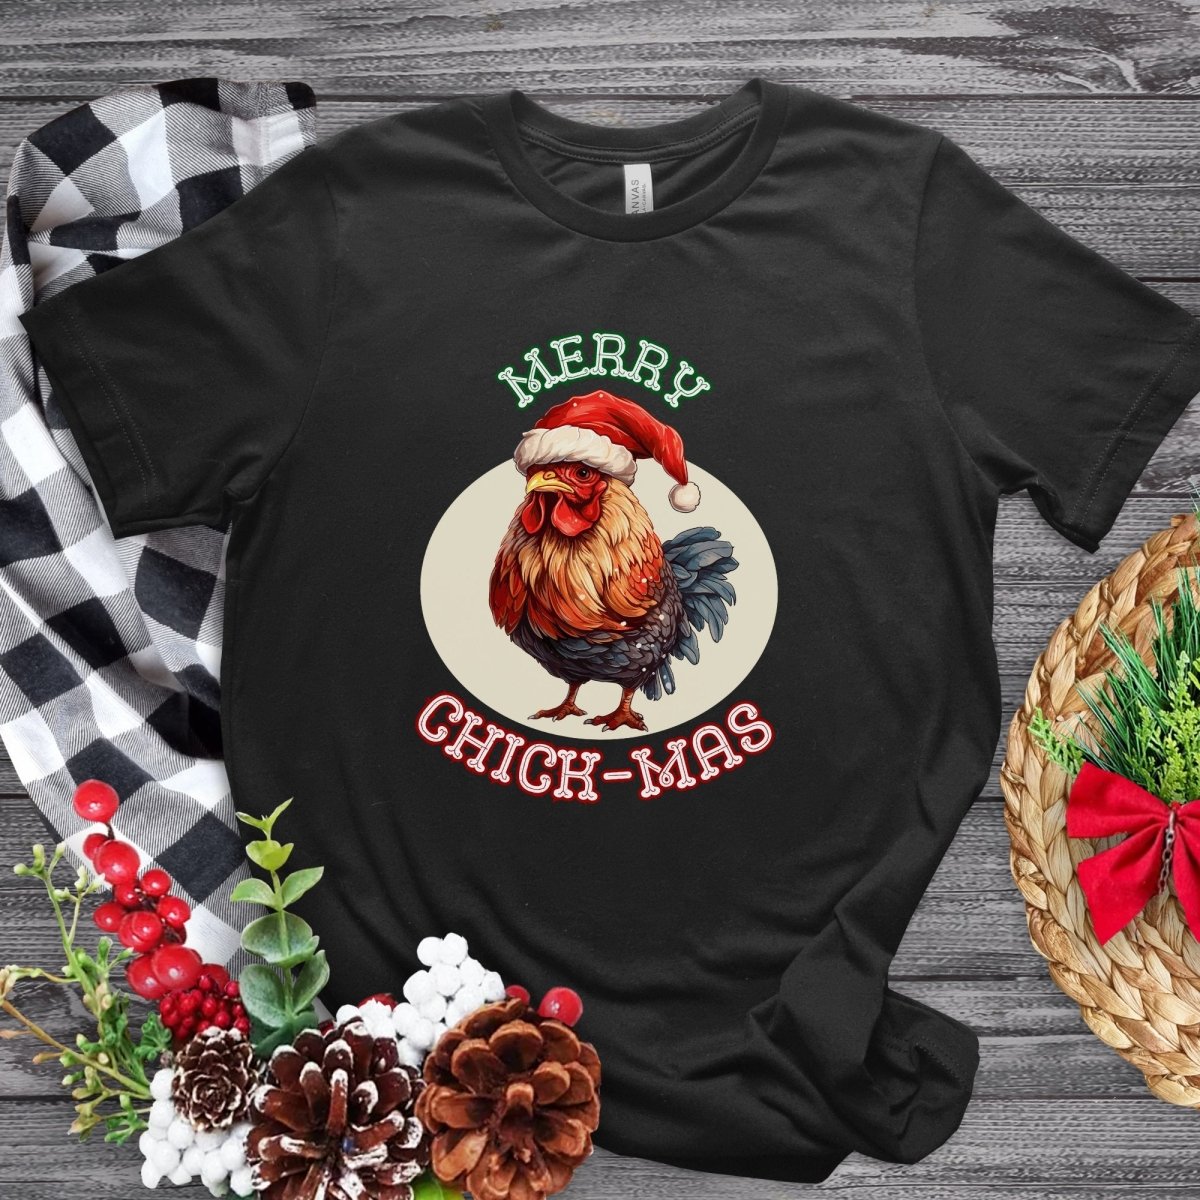 Christmas Chicken T-Shirt - High Quality Festive Unisex T-Shirt, Gift for Him, Gift for Chicken Lovers, Funny Farm Animal Xmas Shirt - Everything Pixel